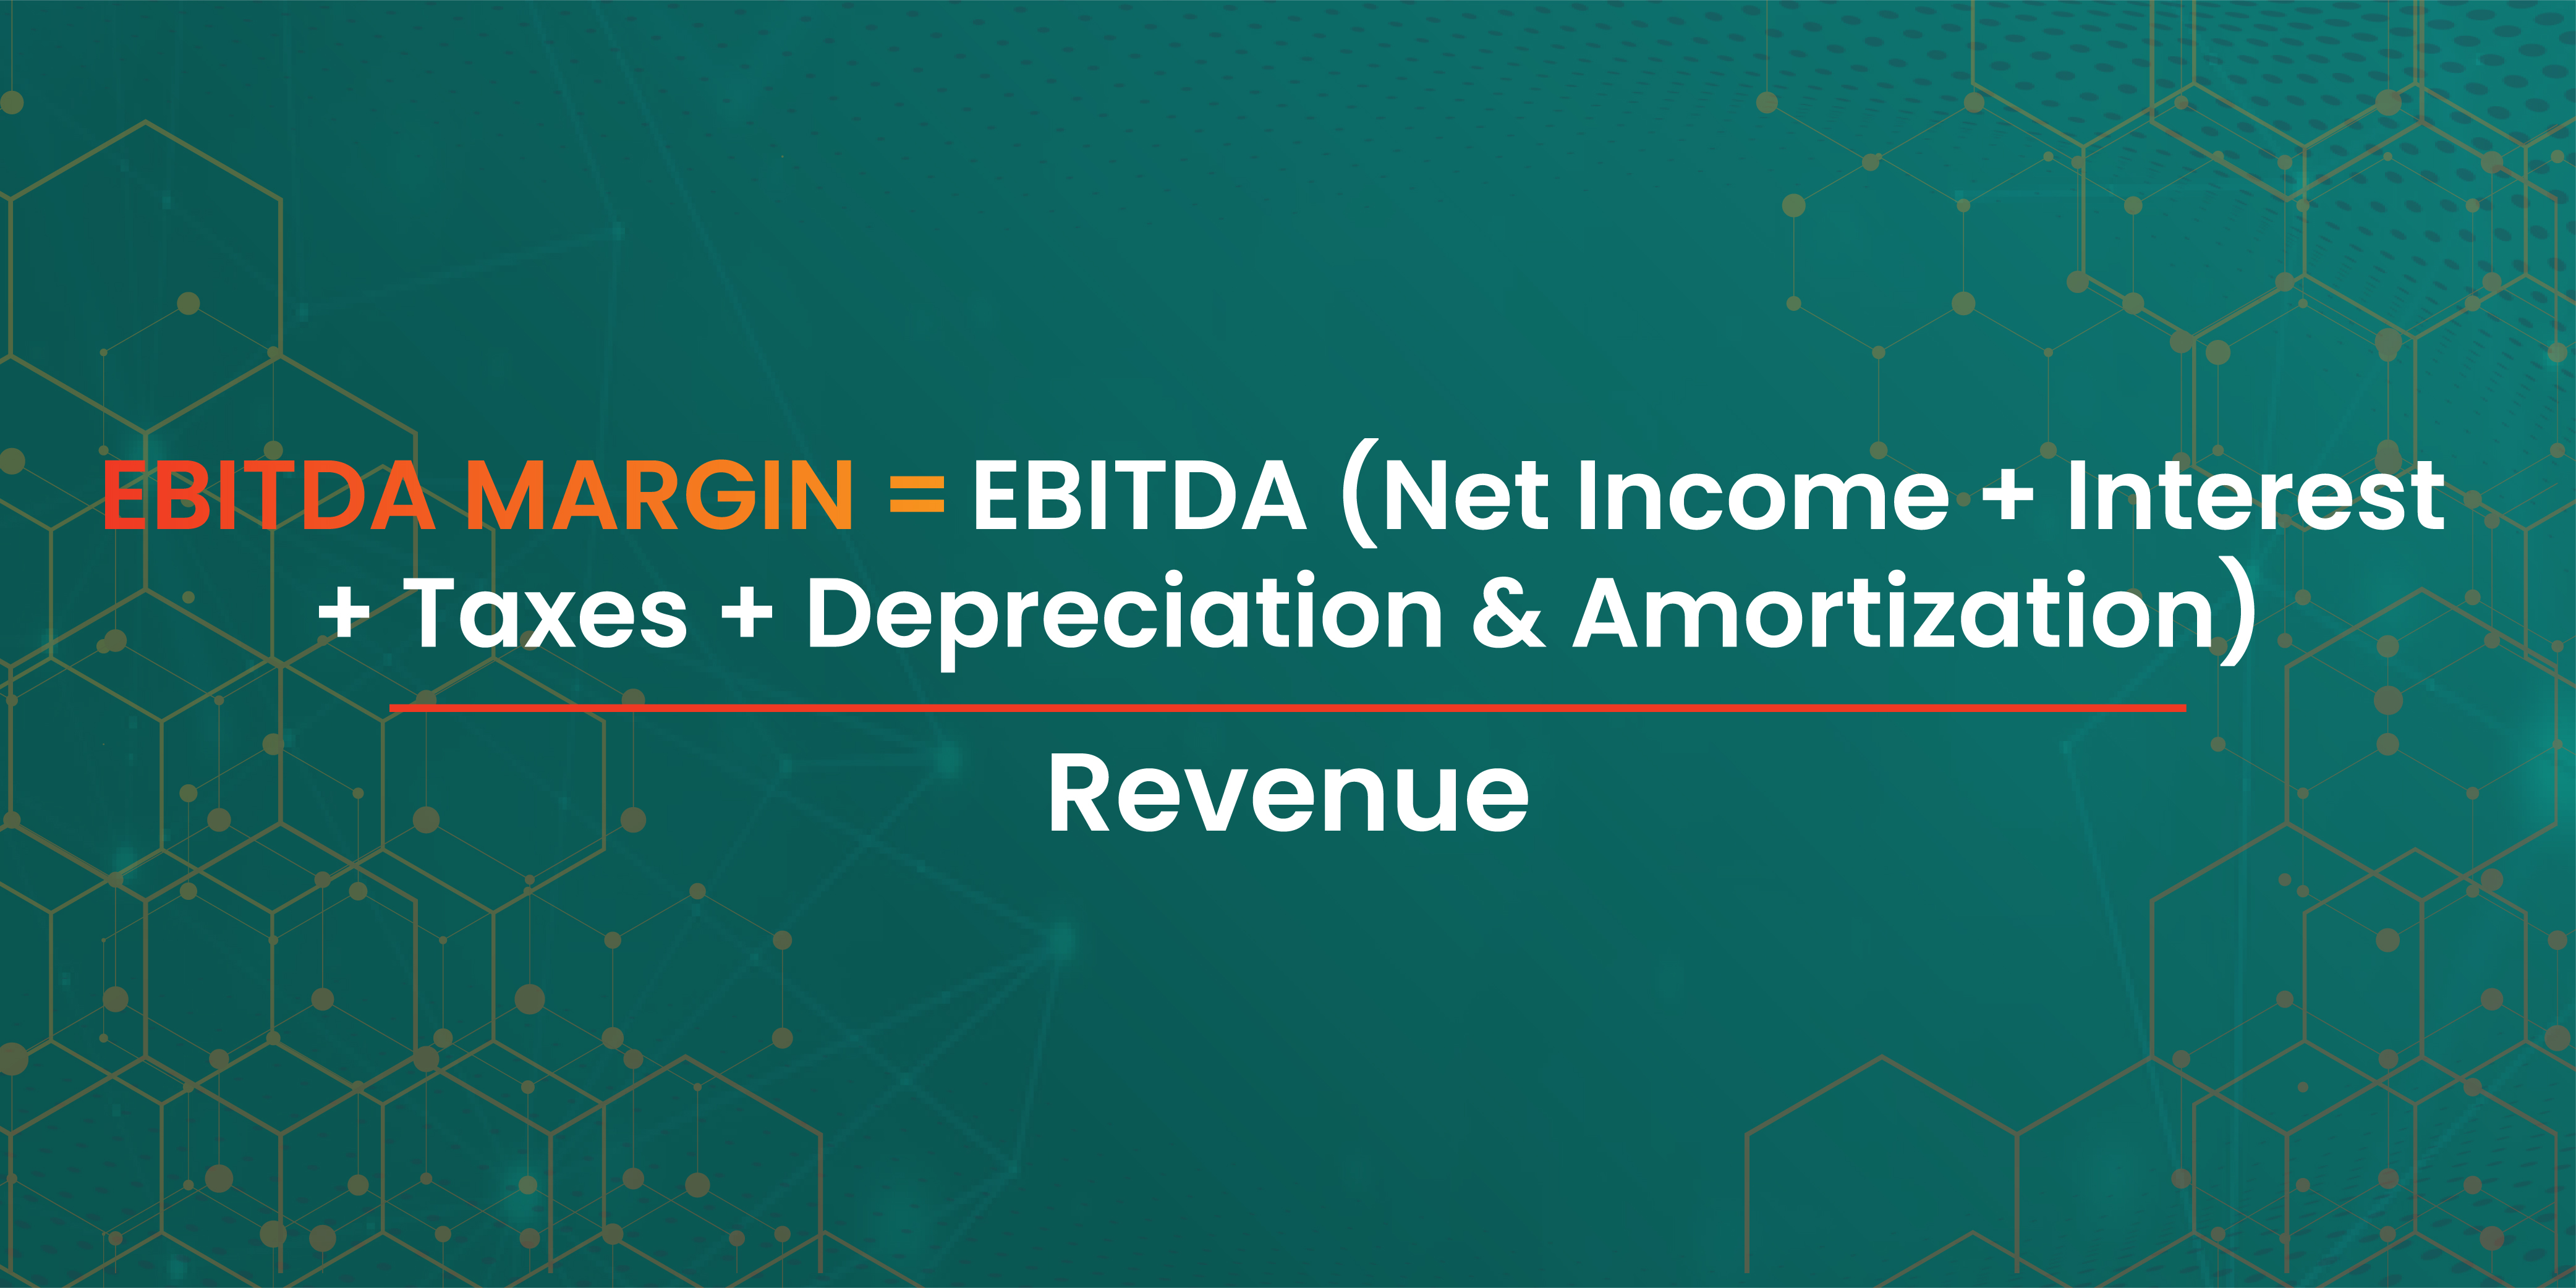 How Is EBITDA Used, and How Is It Calculated